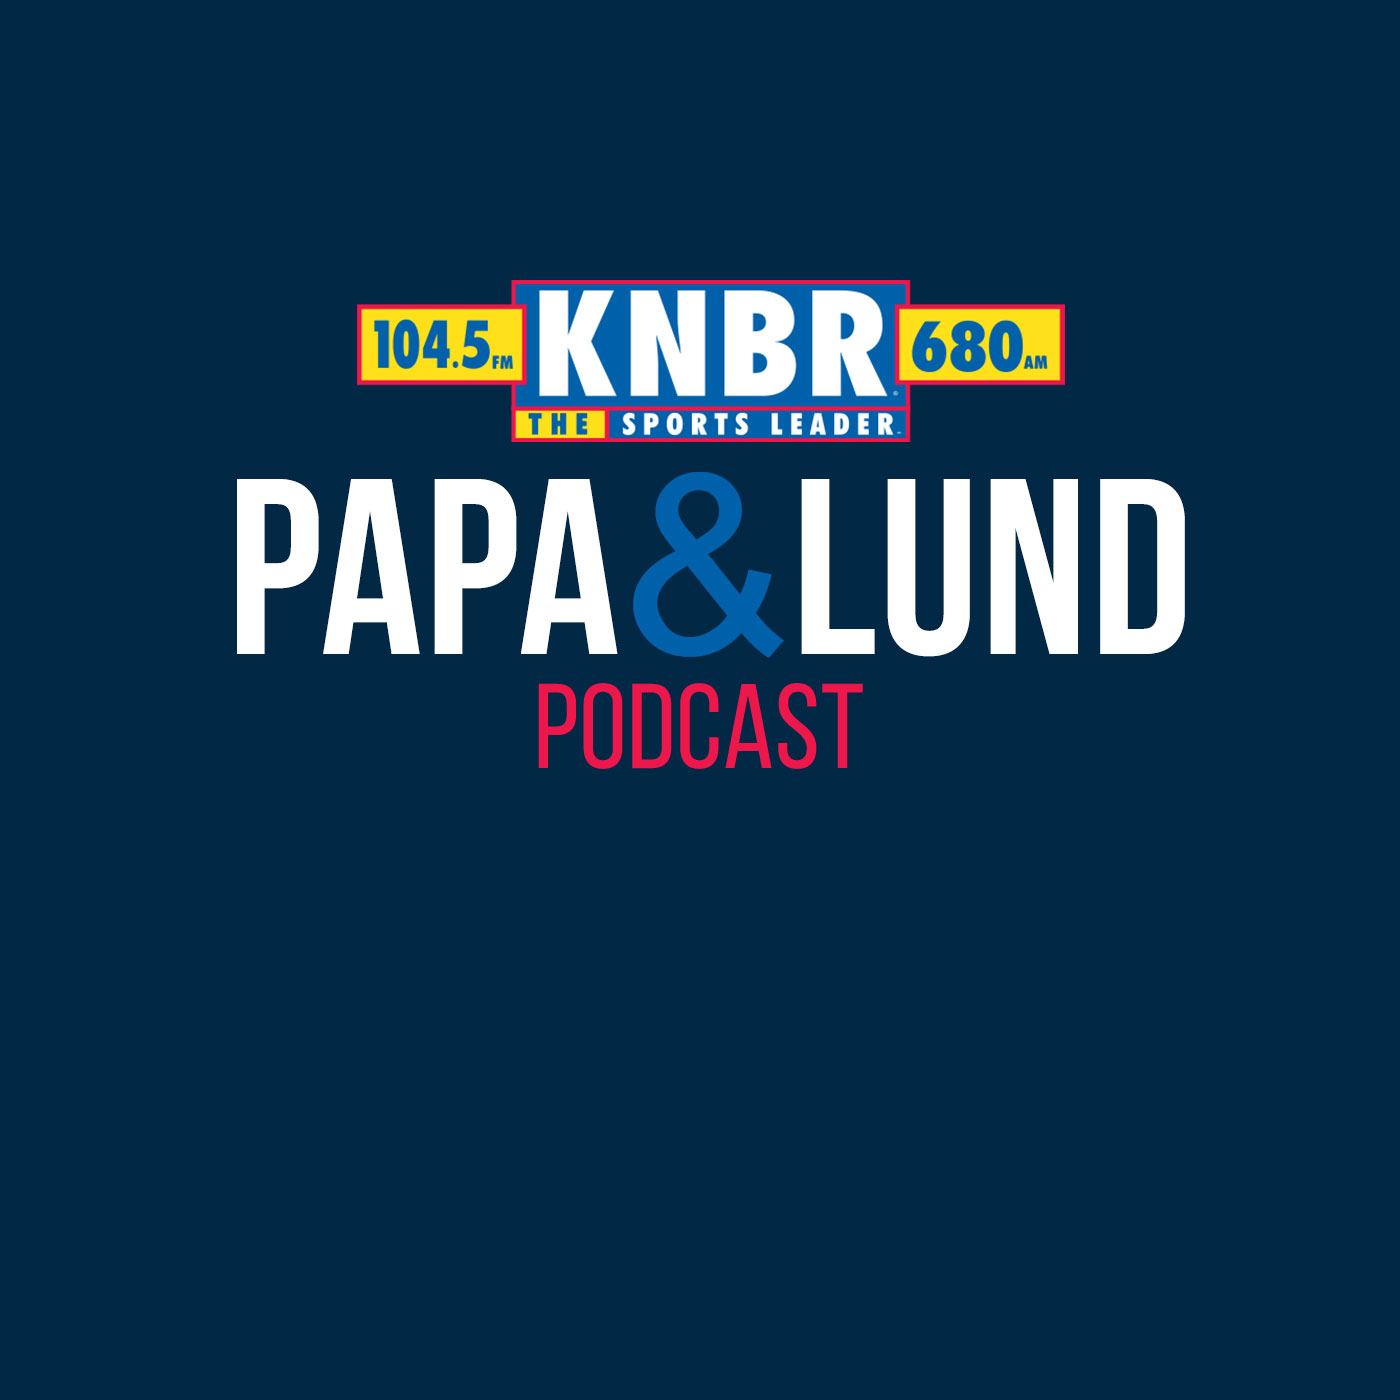 4-26 Ricky Pearsall joins Papa & Lund for a warm welcome to Niners Nation